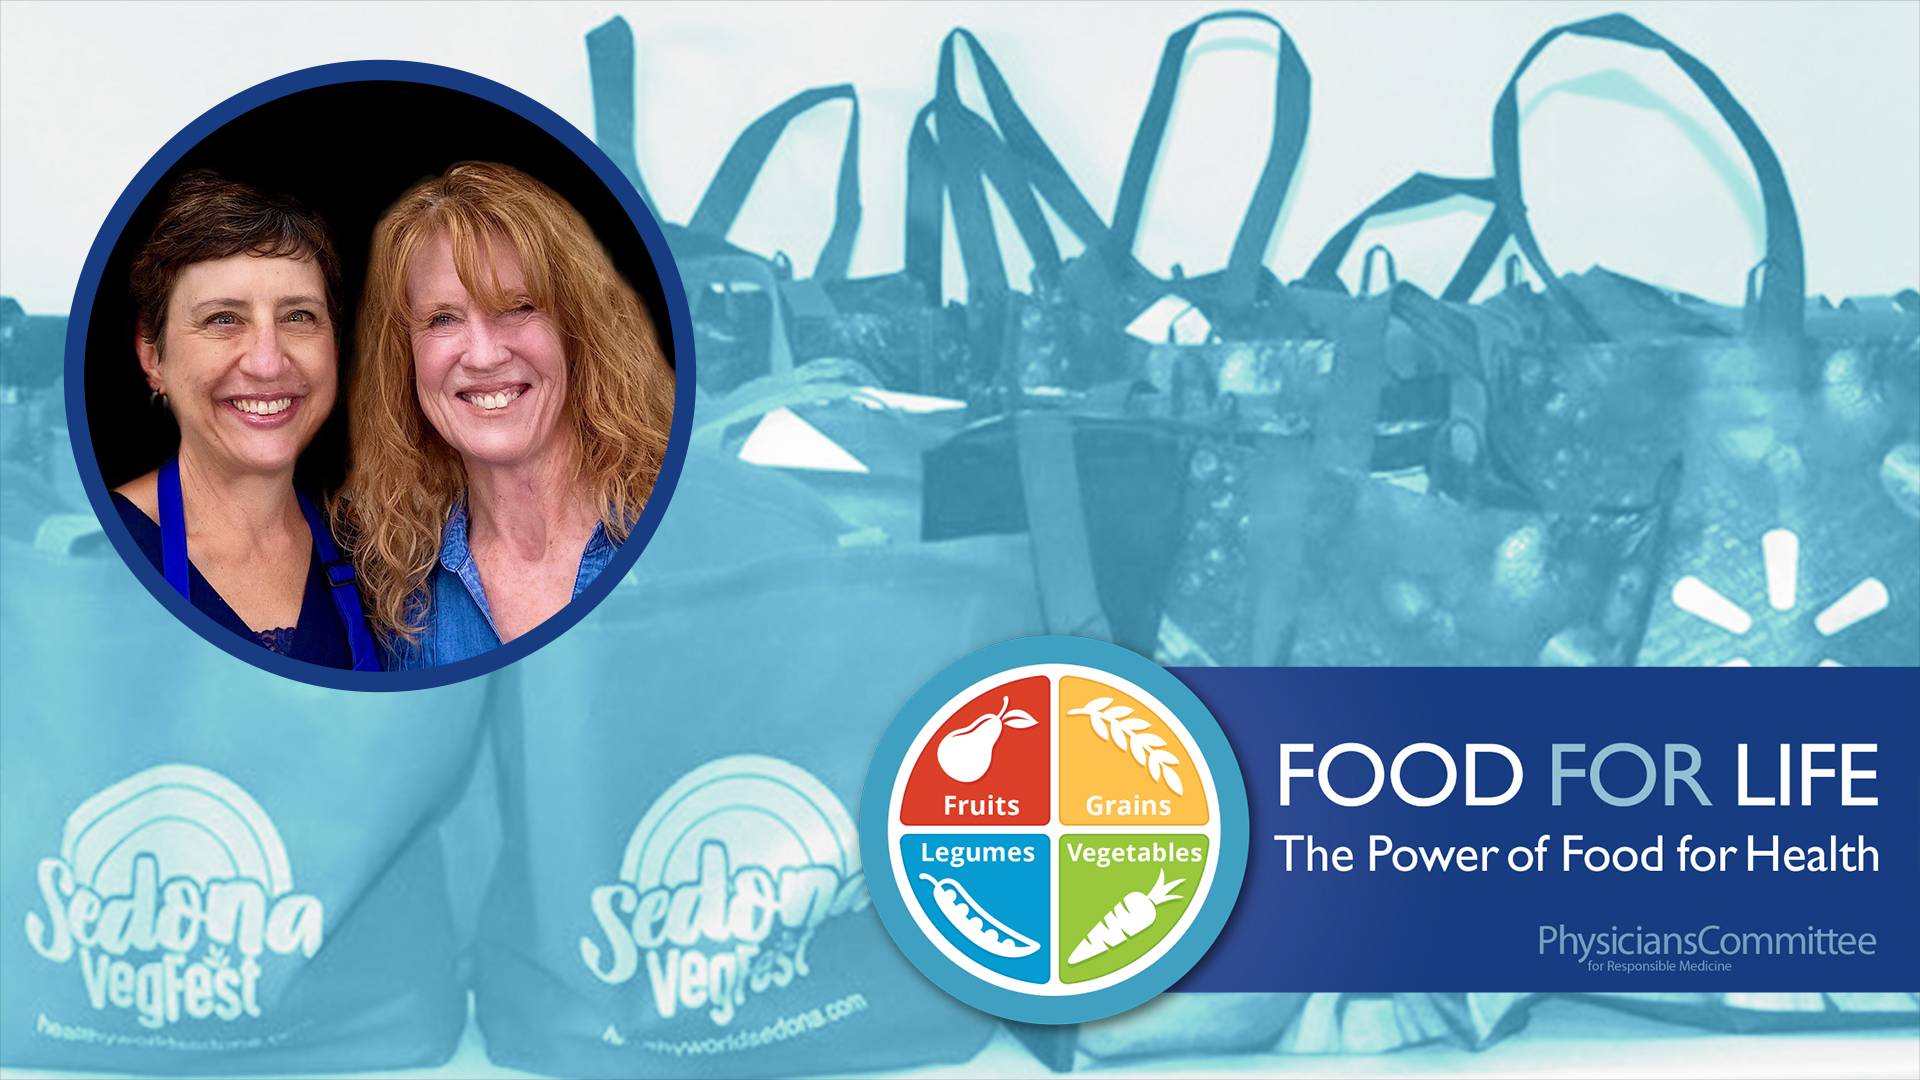 Arizona Food Bank Provides Food for Life Class and Plant-Based Meals Kits